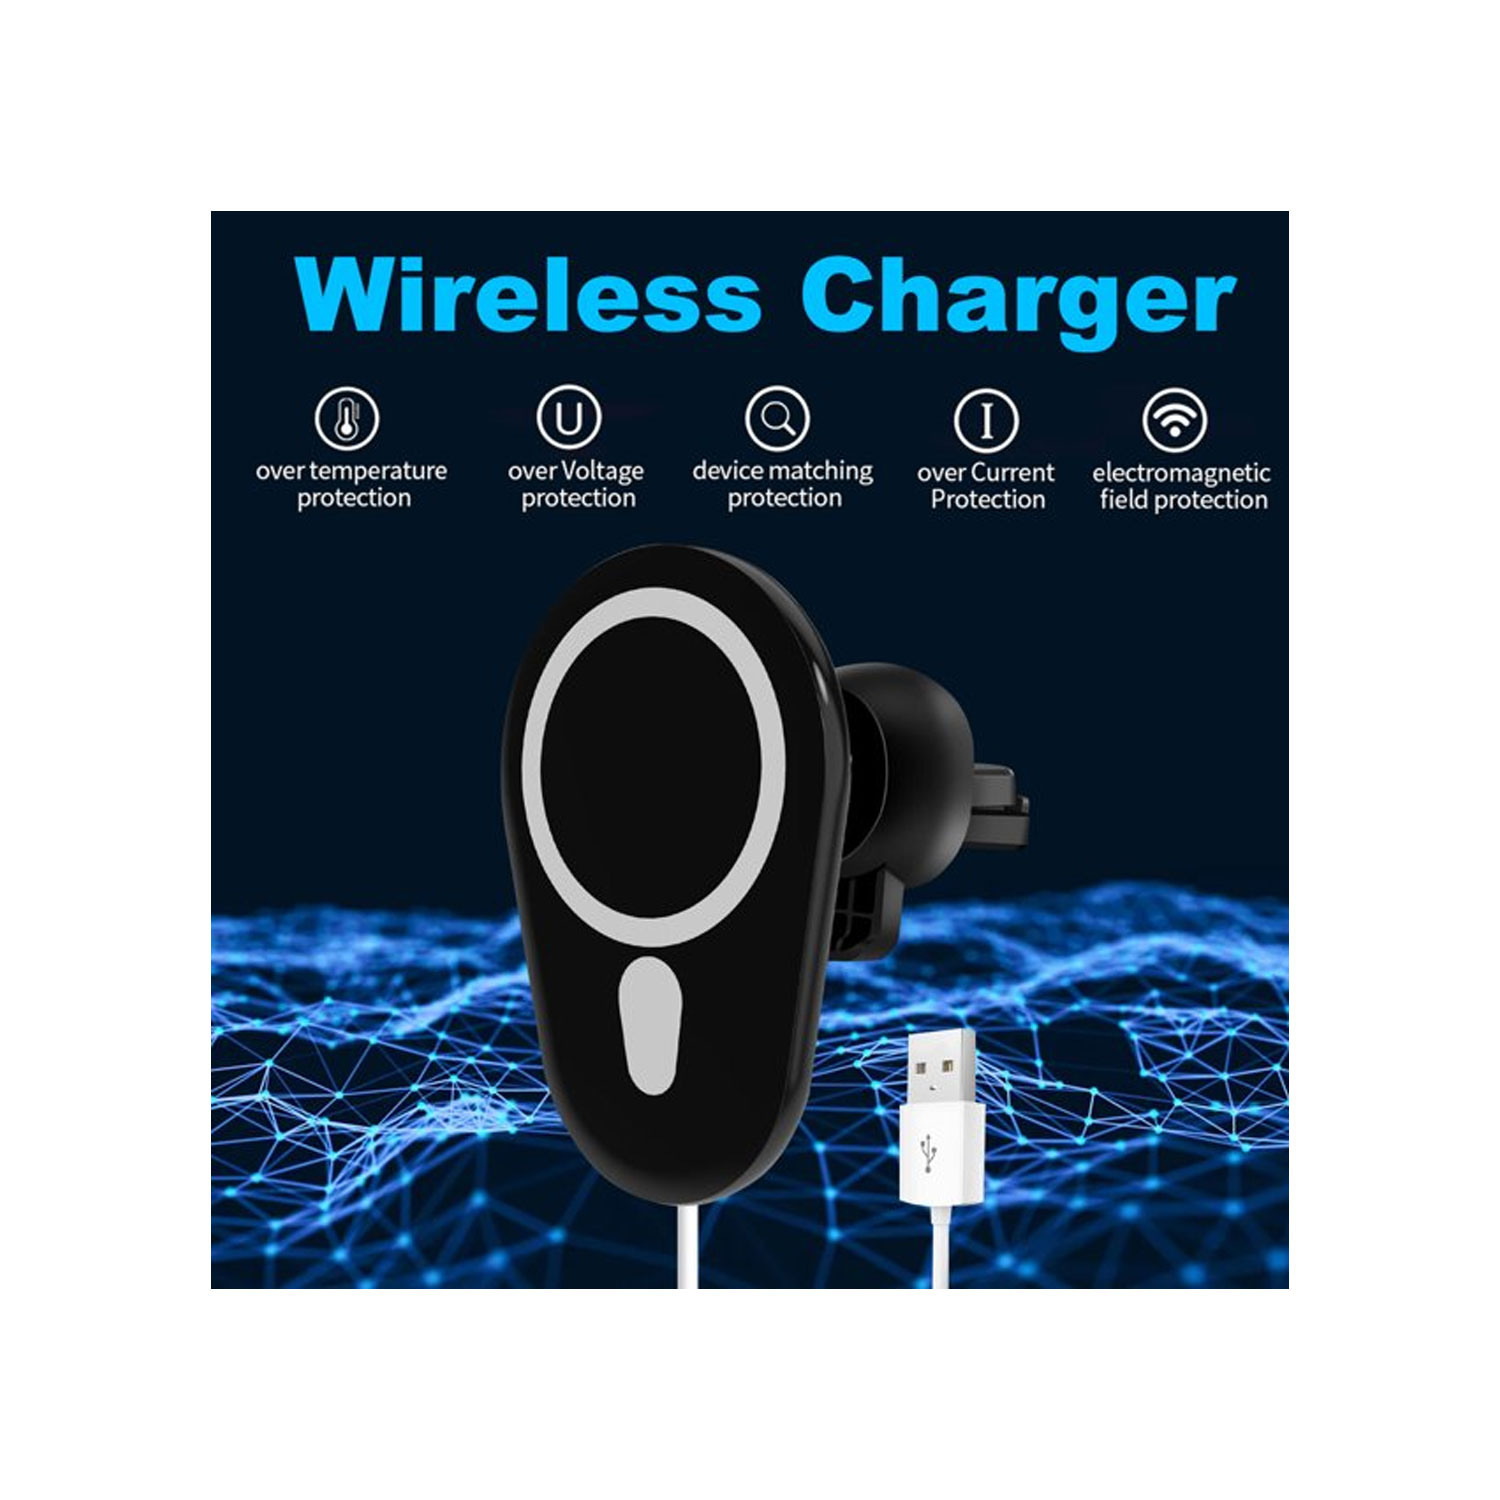 HyperGear MagVent 15W Wireless Charging Mount